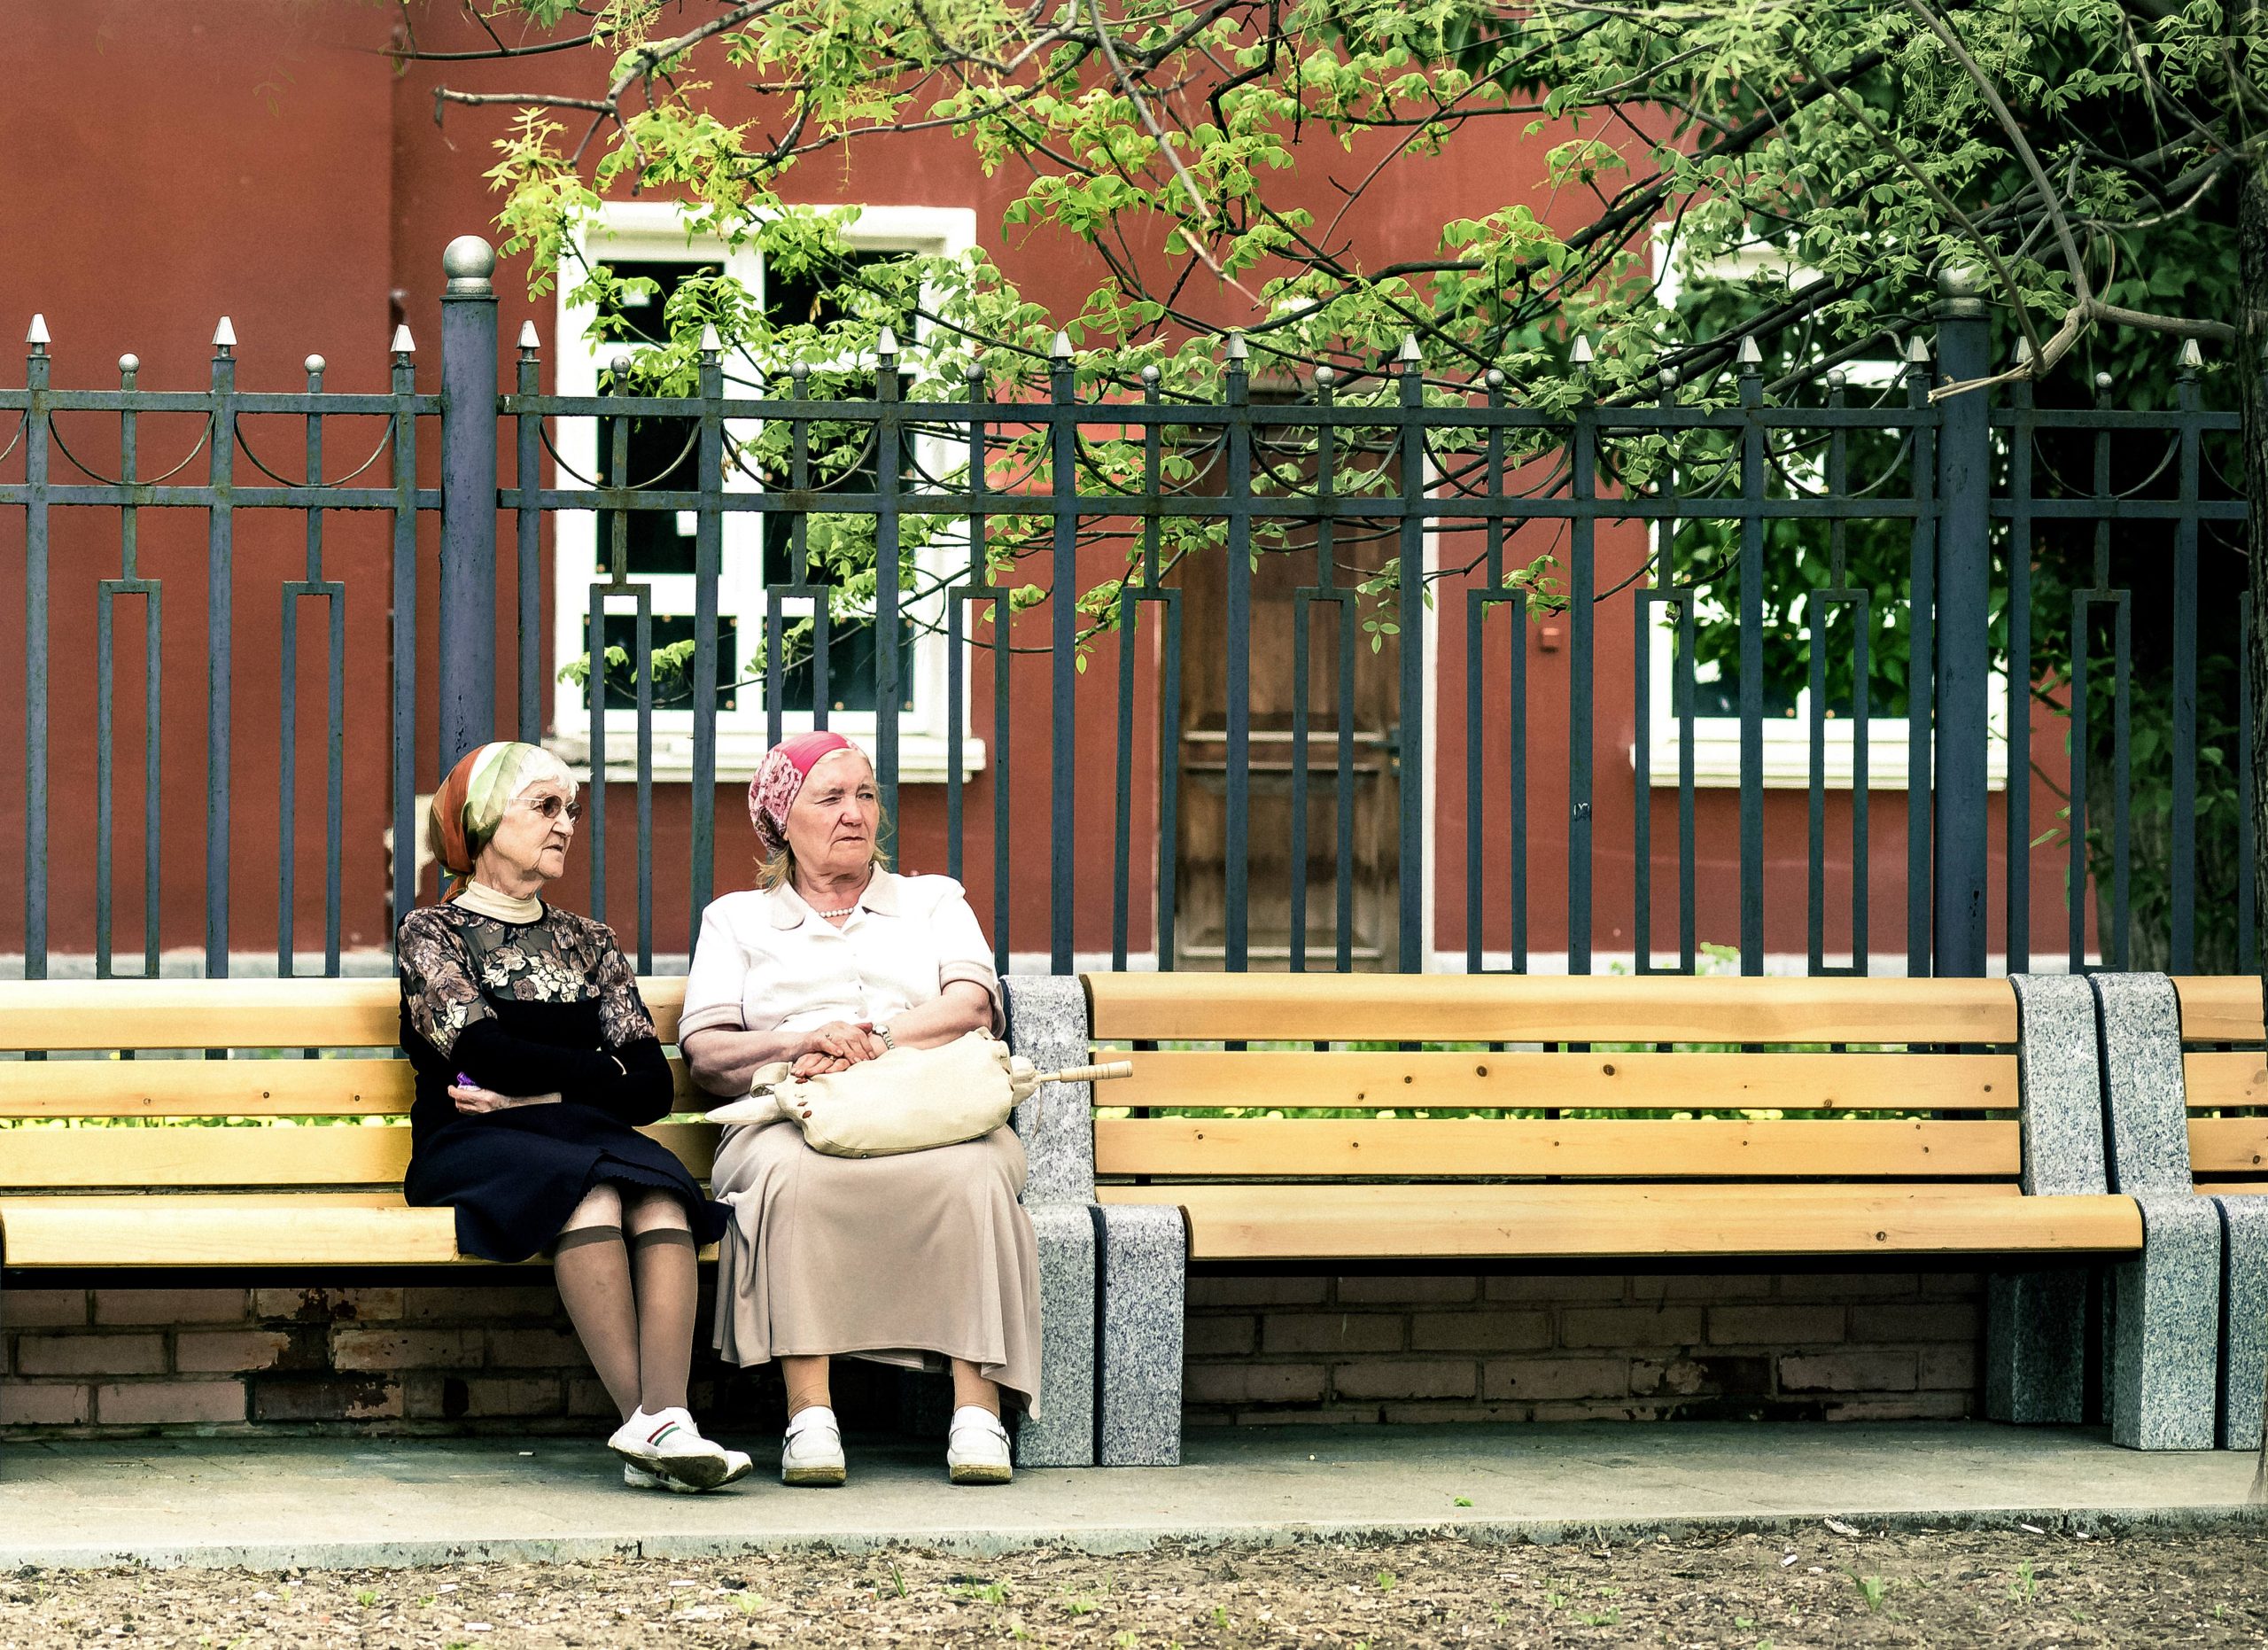 Two Old Women on a Bench